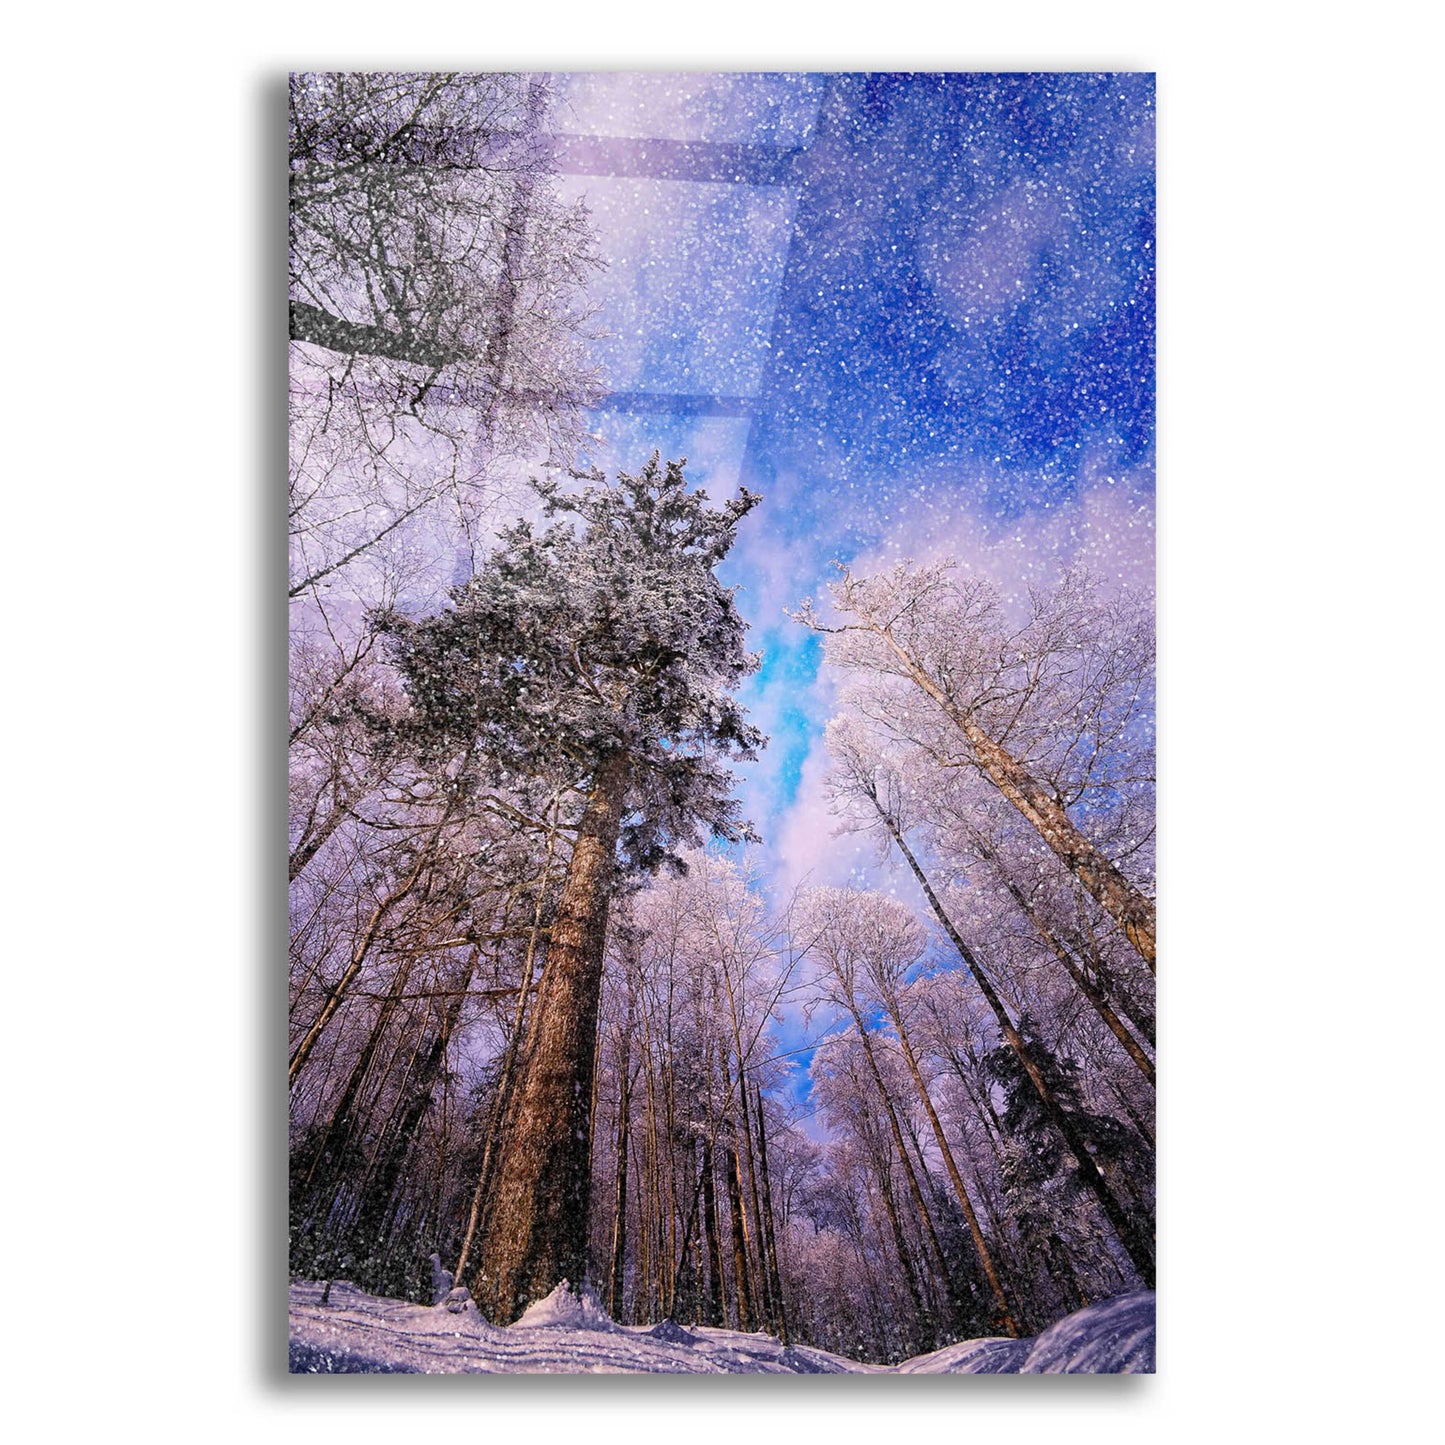 Epic Art 'Let it snow' by Philippe Sainte-Laudy, Acrylic Glass Wall Art,12x16